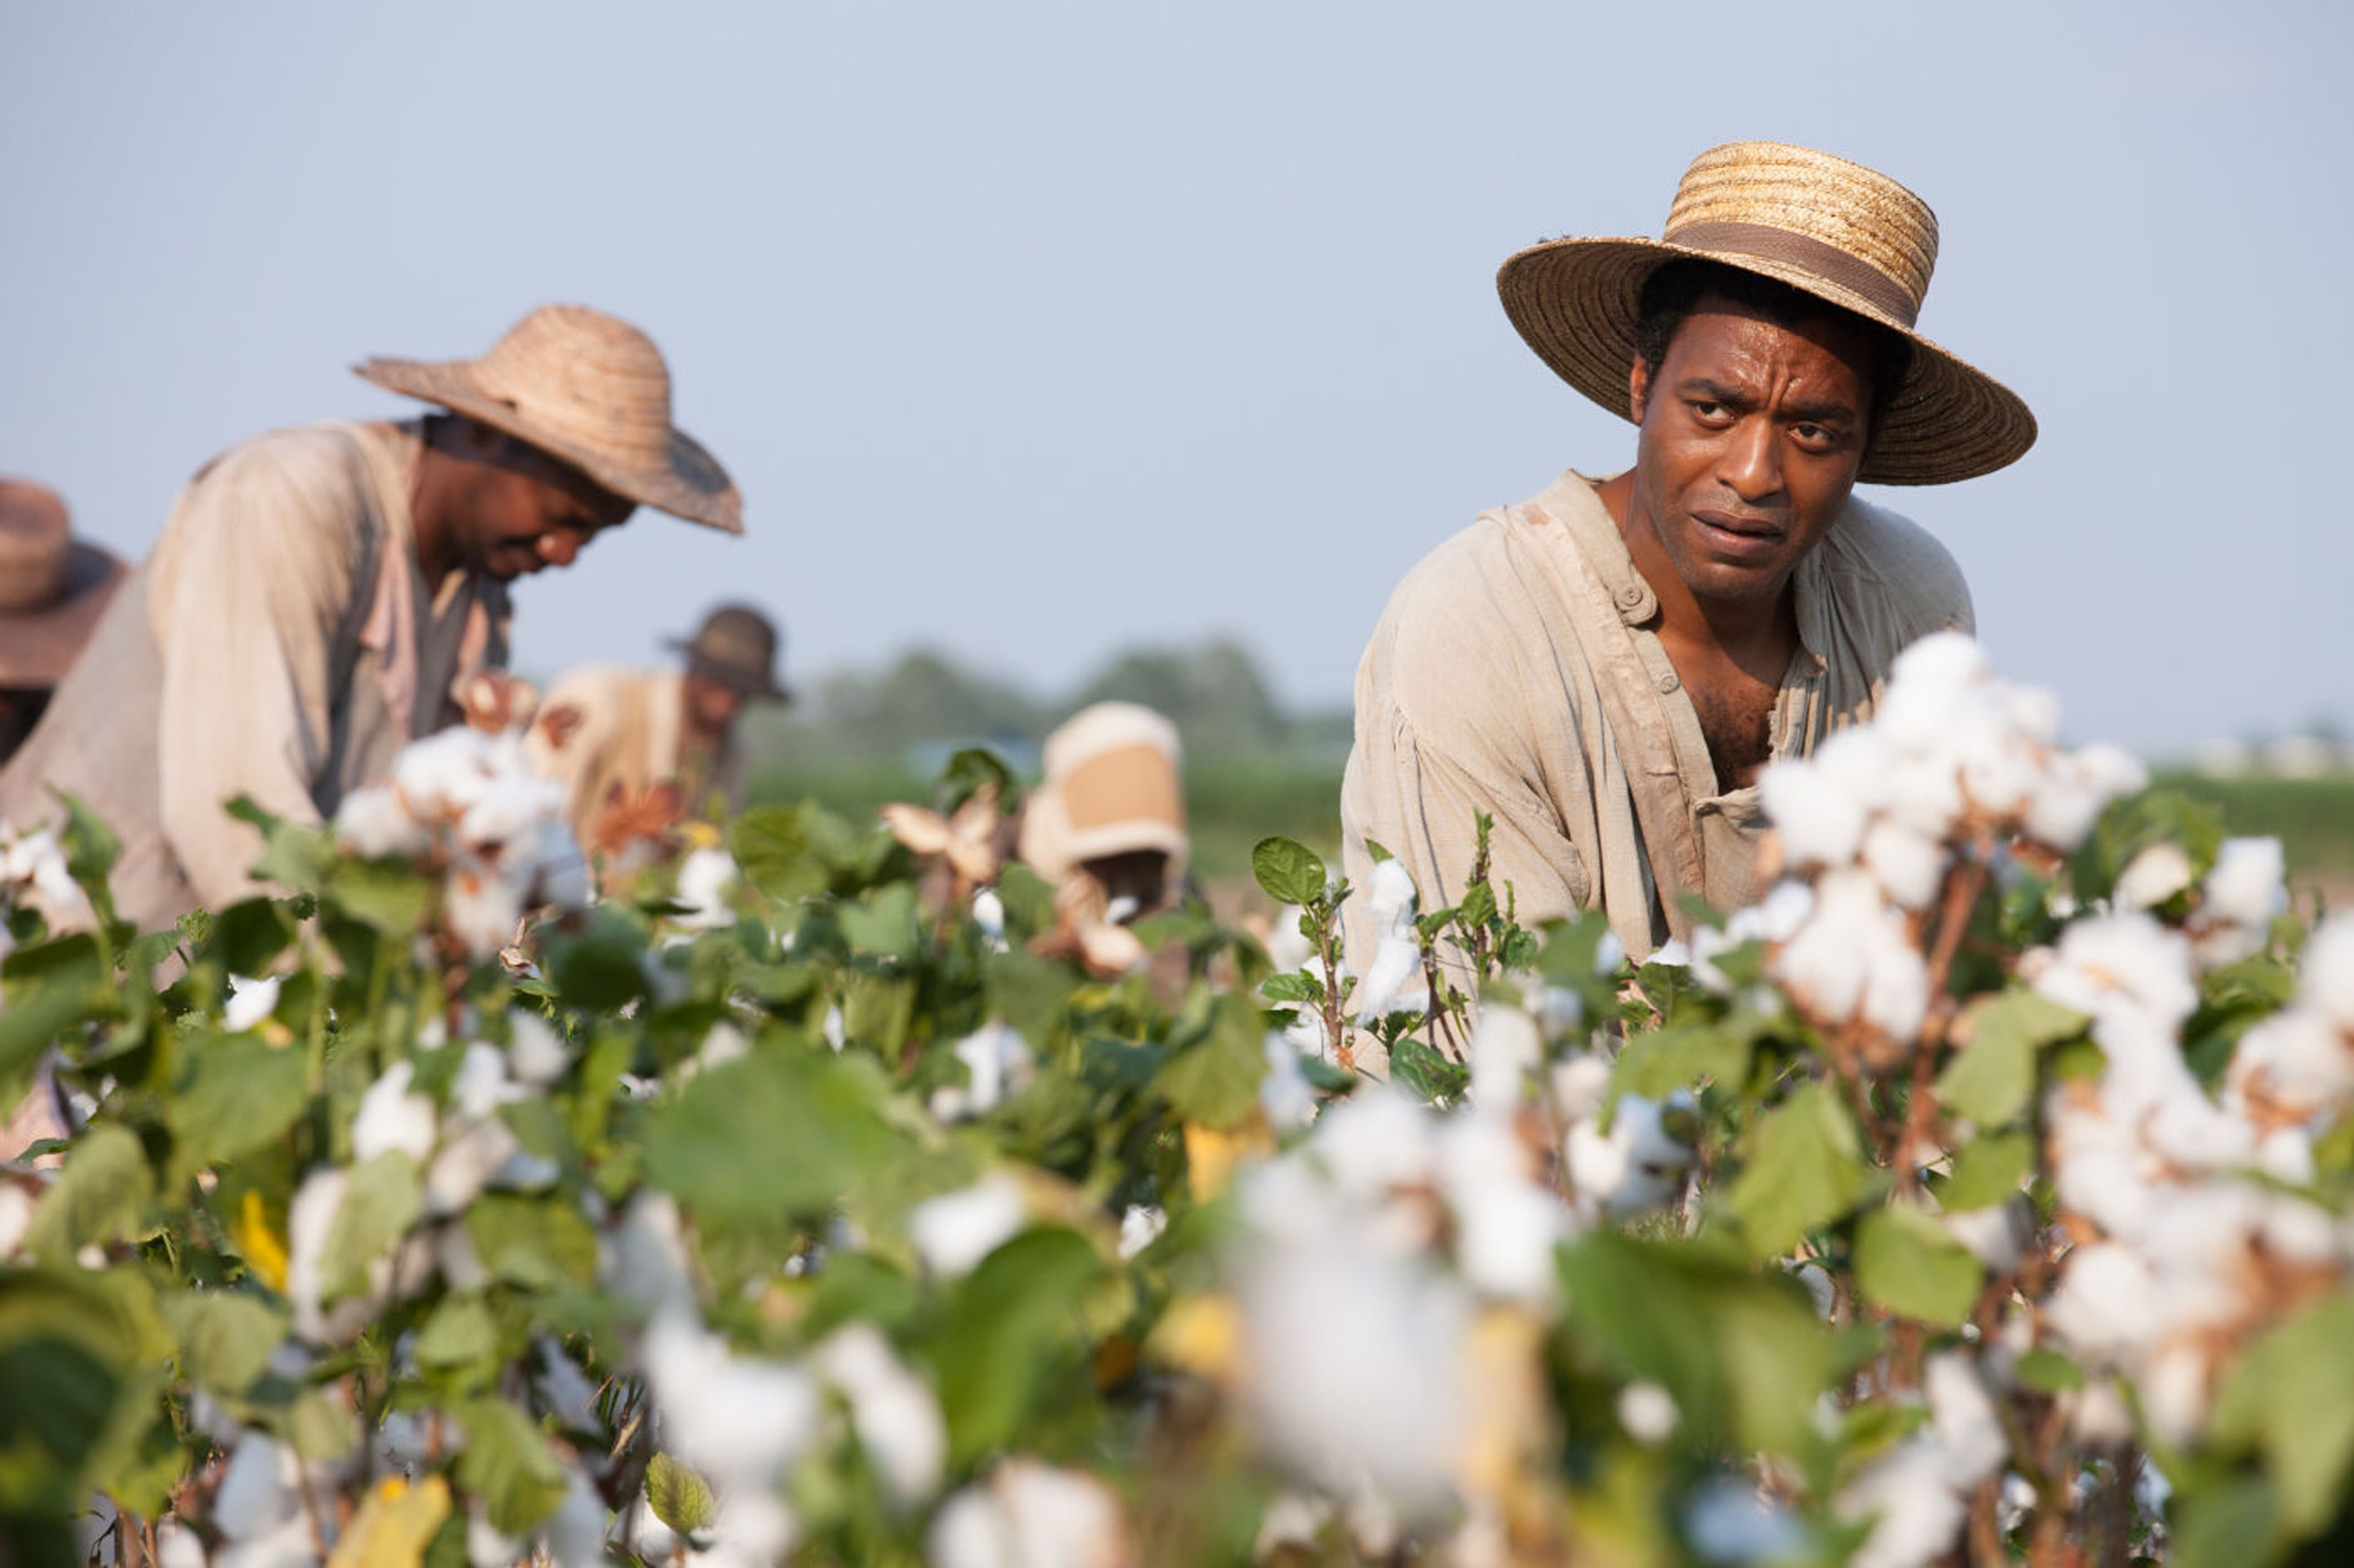 Chiwetel Ejiofor stares with concern while laboring in the glaring sun in a cotton field